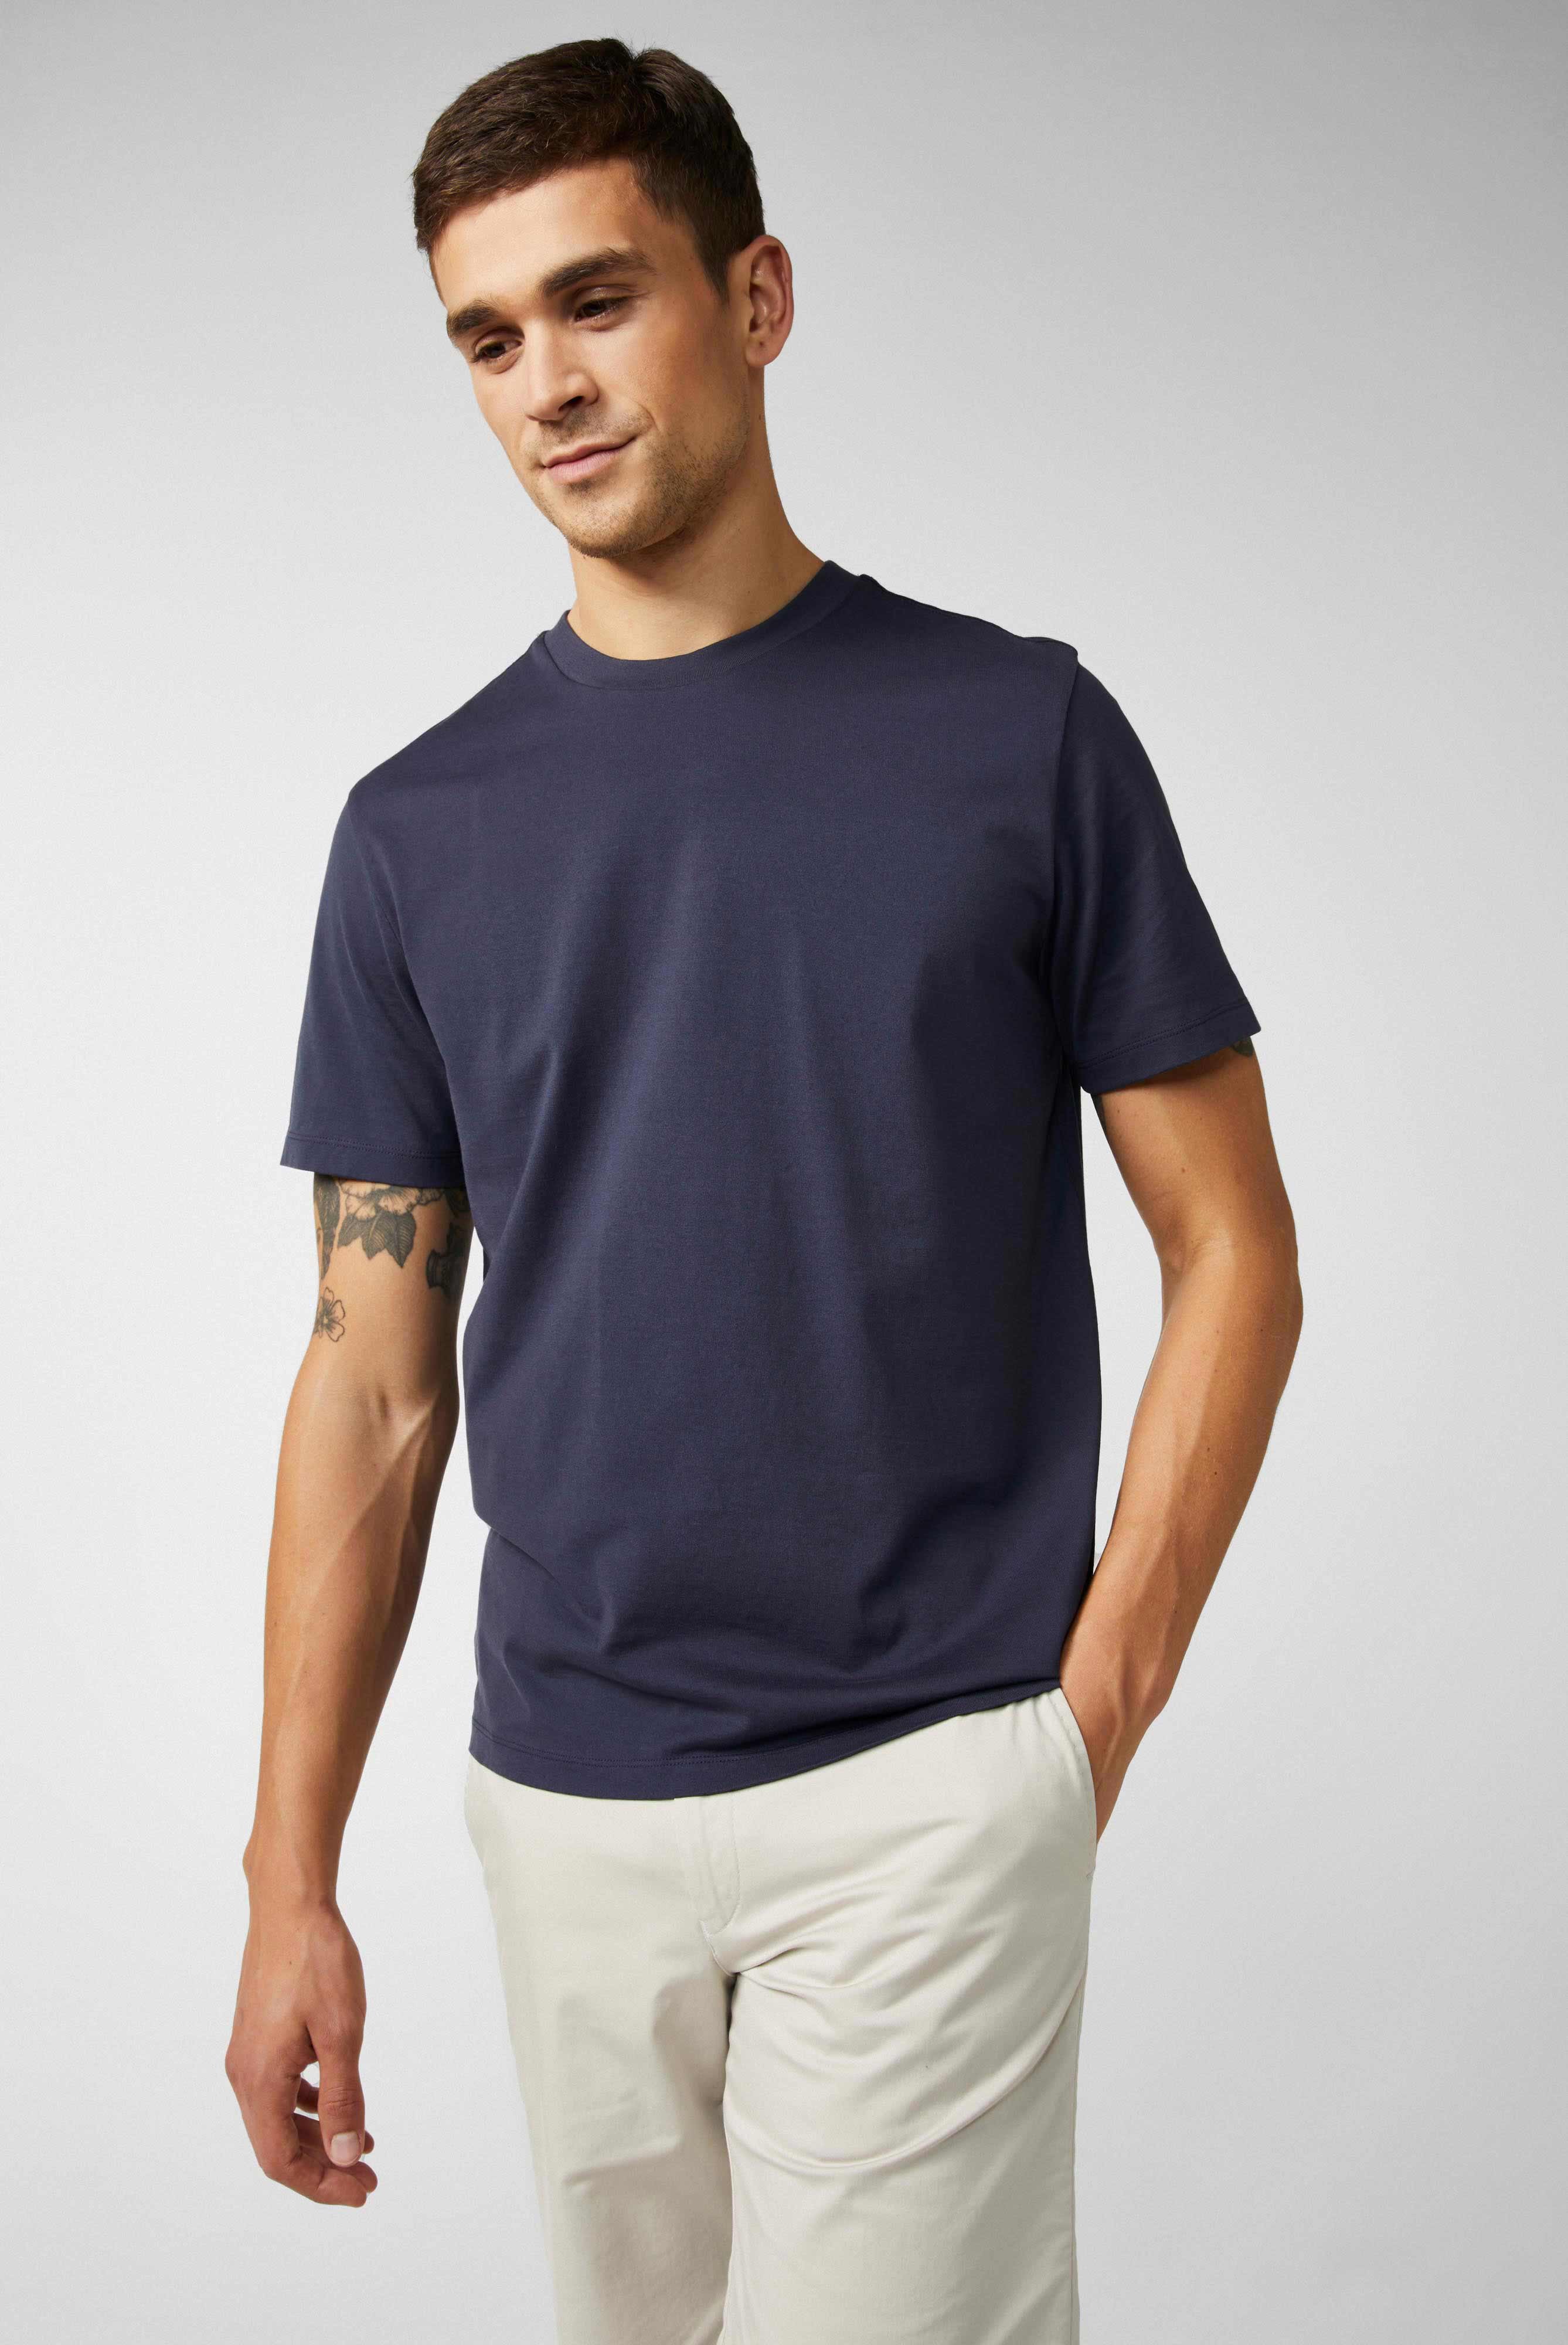 T-Shirts+Relaxed Fit Crew Neck Jersey T-Shirt+20.1660..Z20044.790.M